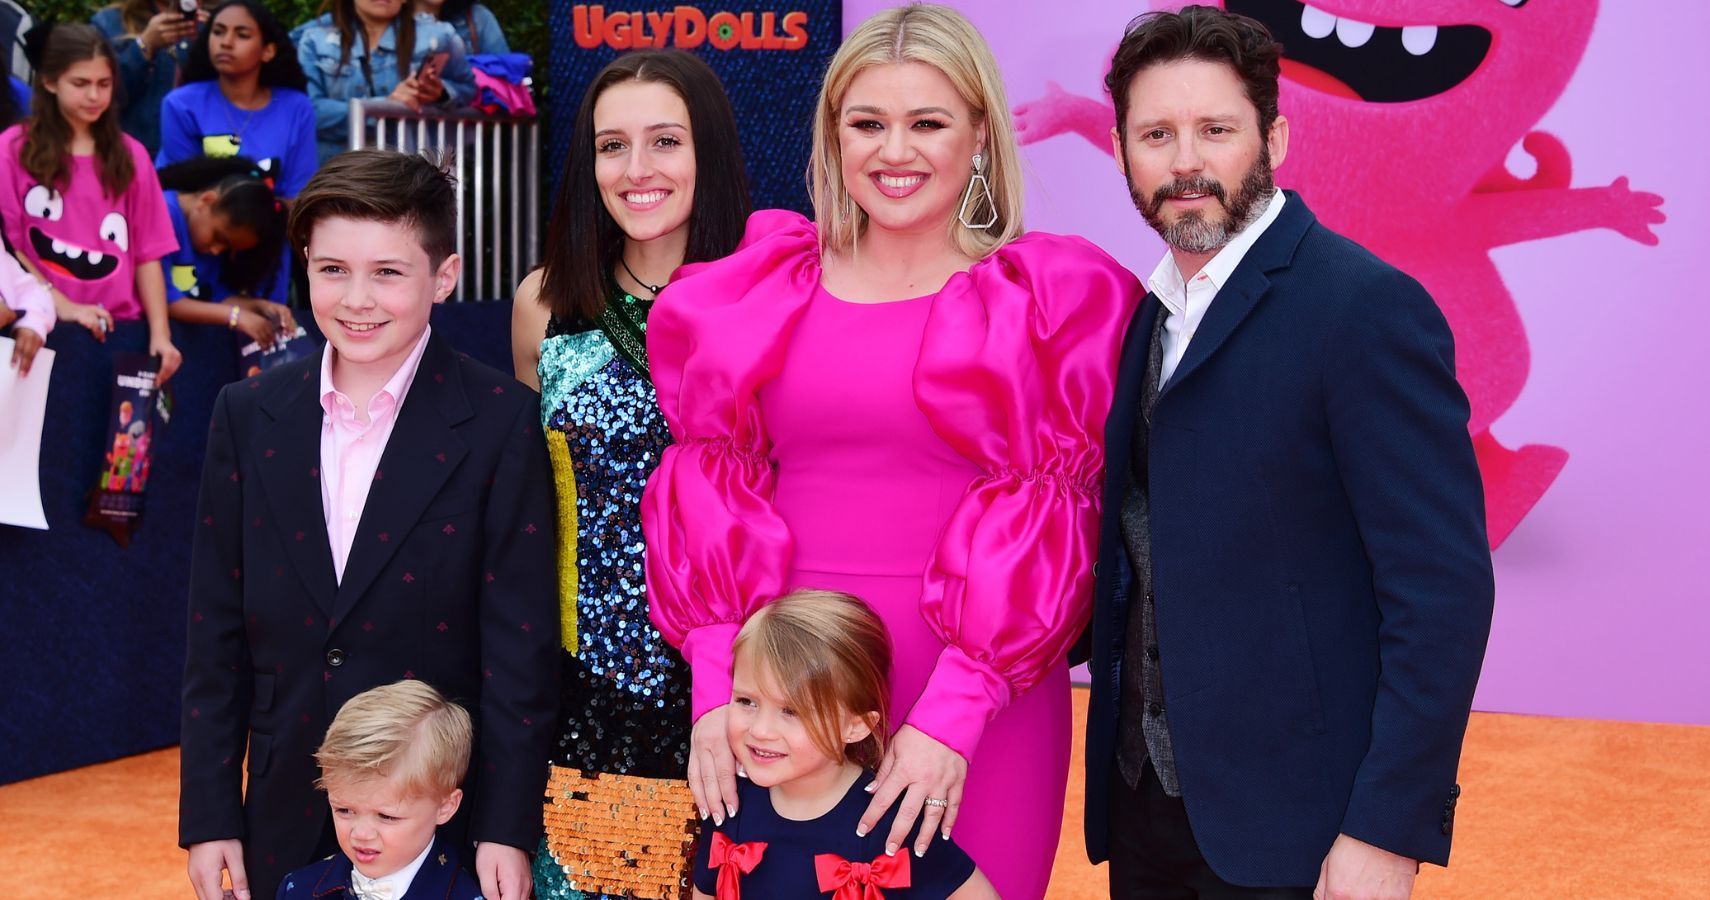 Kelly Clarkson, Brandon Blackstock, and kids on the red carpet